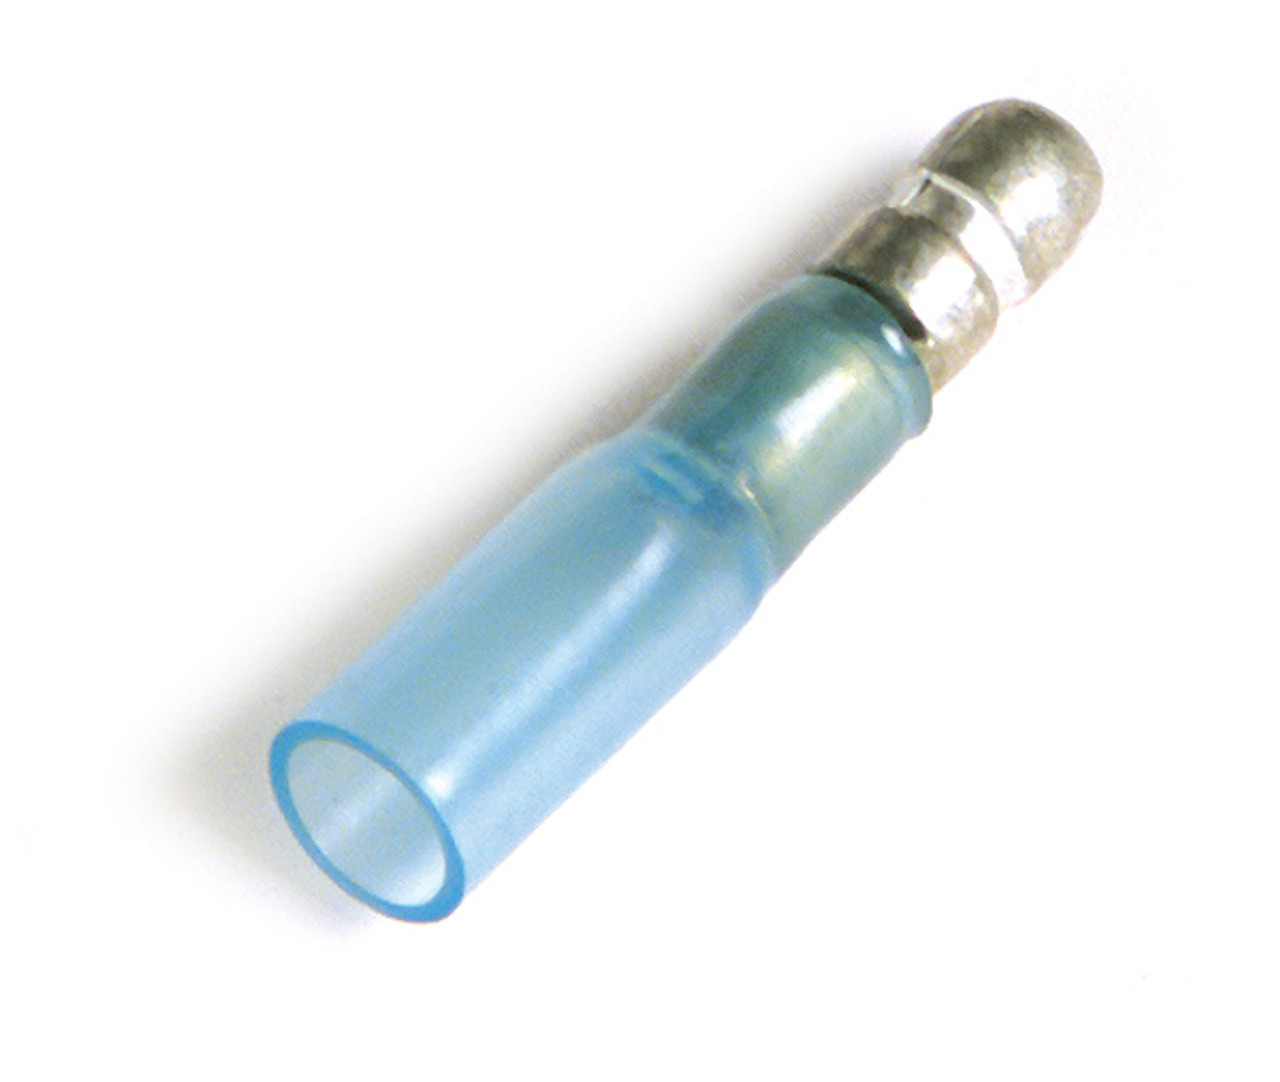 16 - 14 AWG Heat Shrinkable Bullet & Receptacle Connectors Male .197" @ 15 Pack - Blue  84-2434